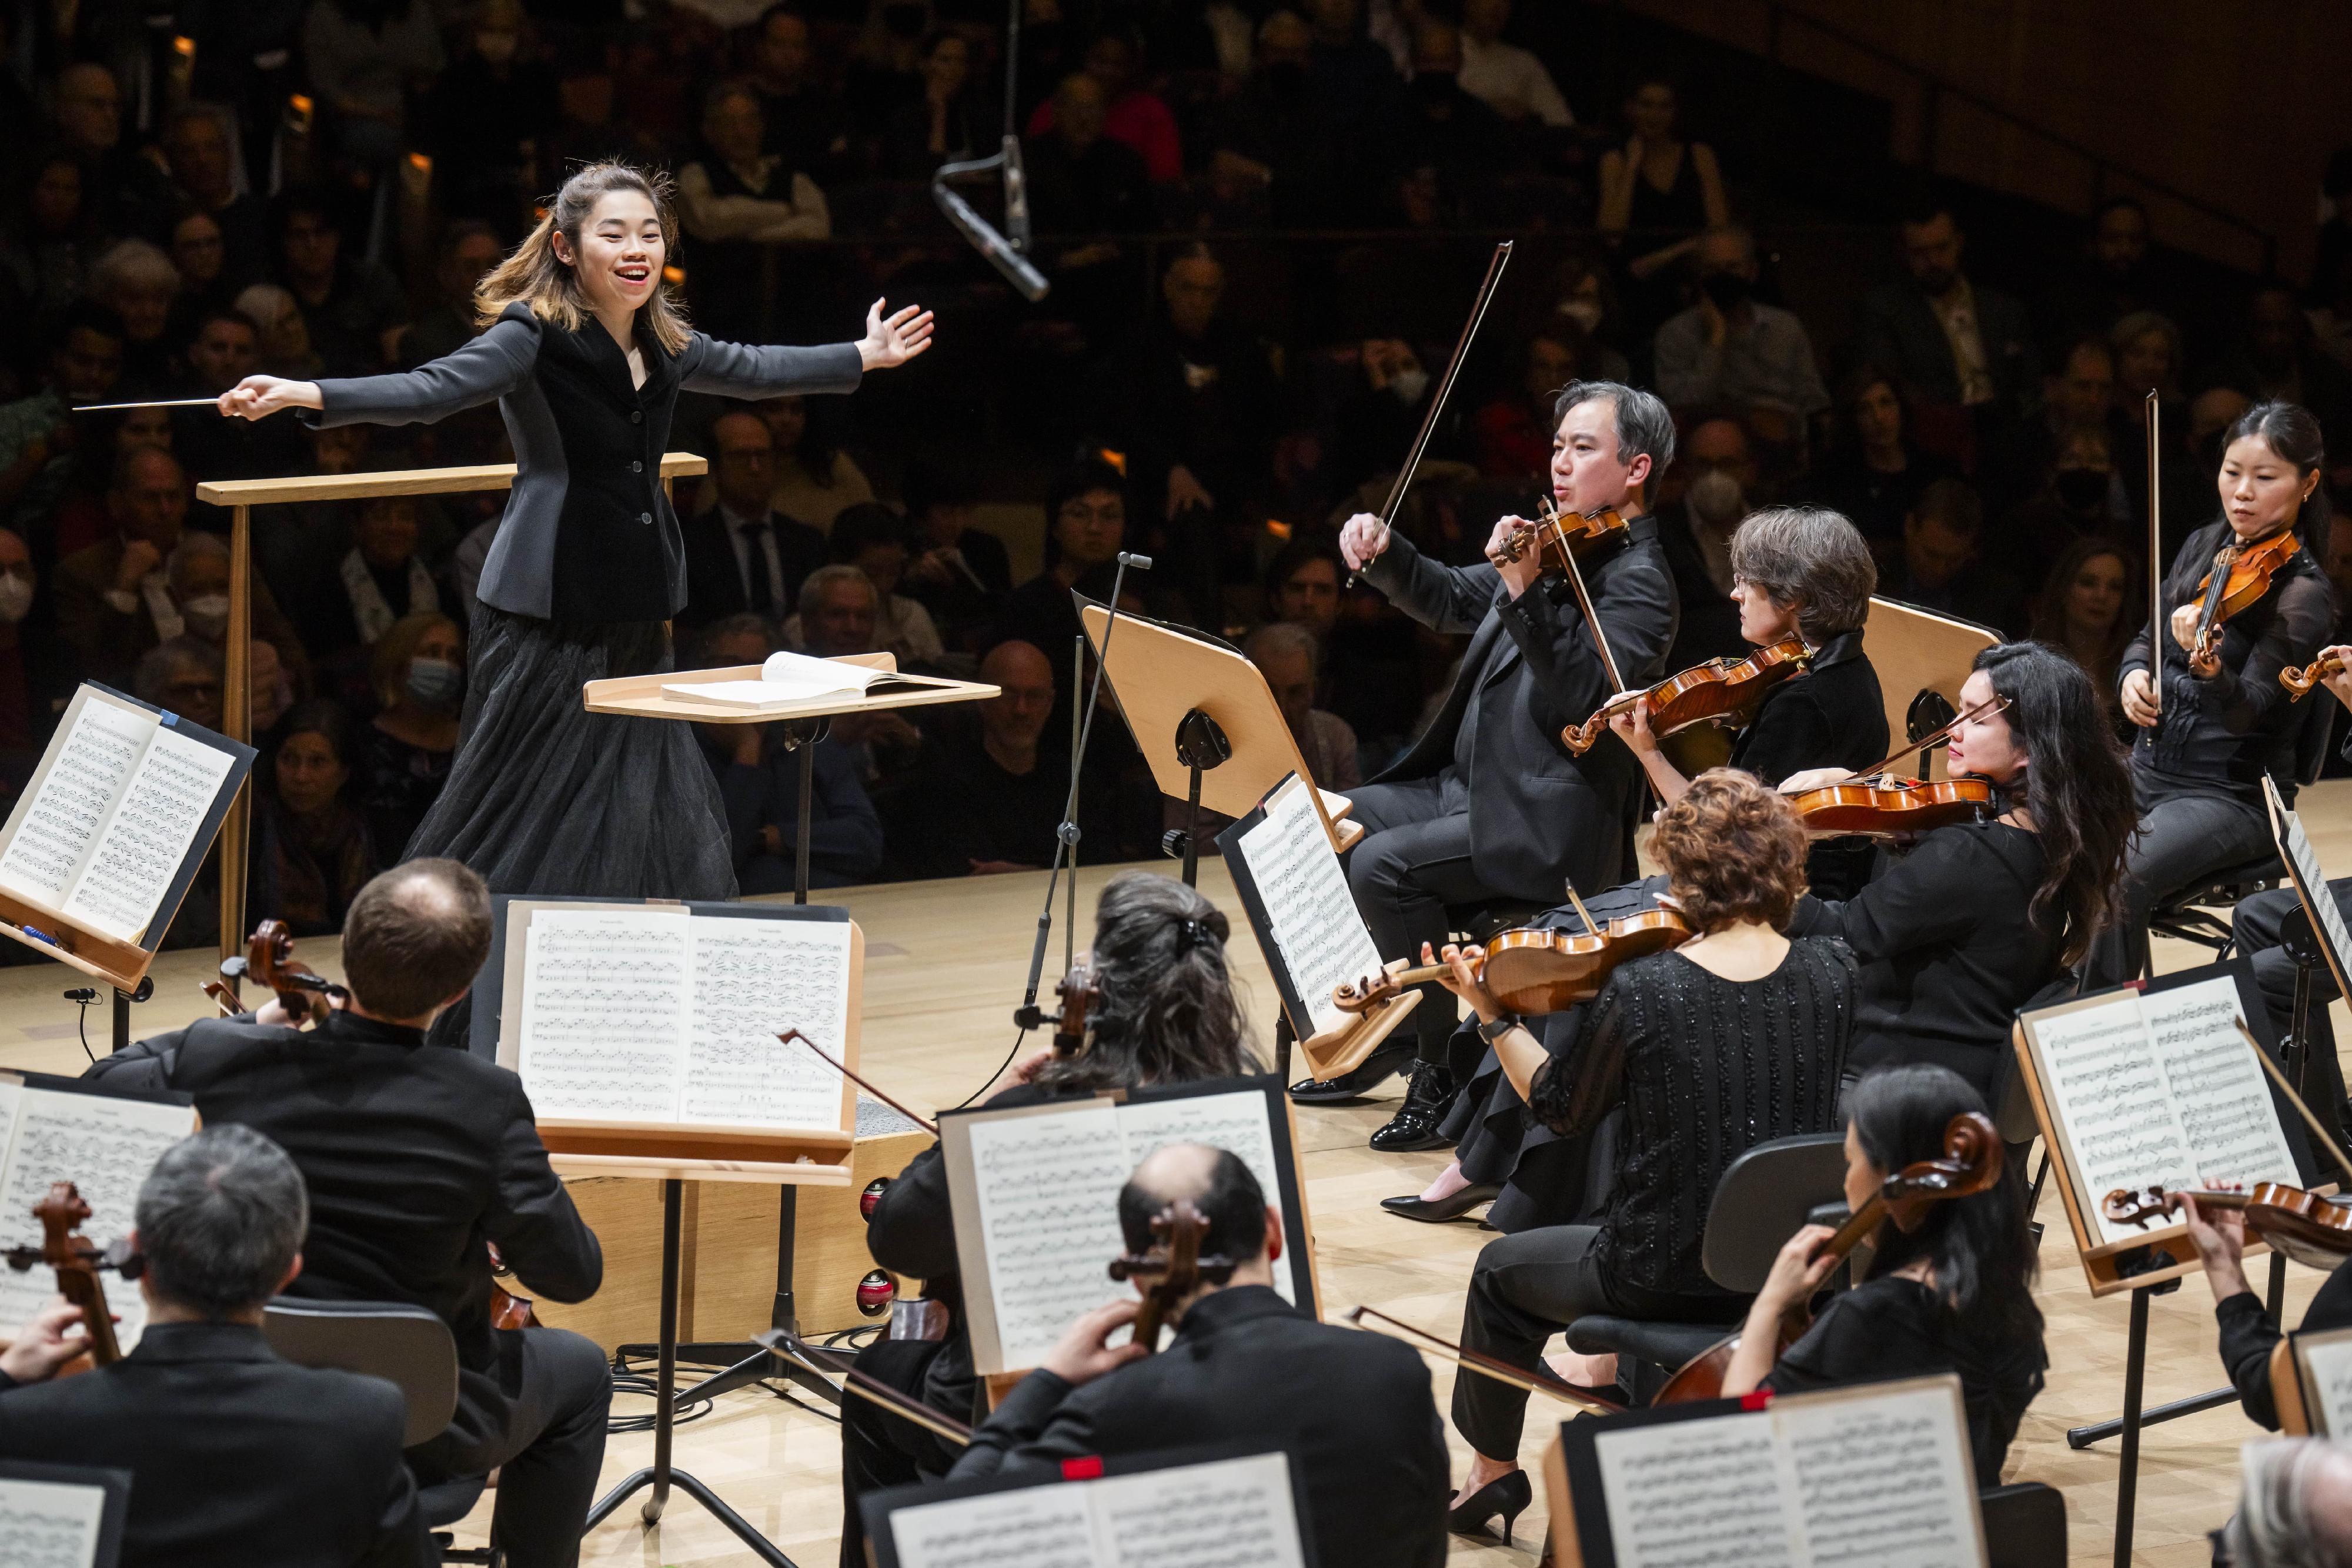 The Hong Kong Economic and Trade Office, New York hosted a celebratory cocktail reception for Hong Kong conductor Elim Chan at her debut with the New York Philharmonic at David Geffen Hall, Lincoln Centre on March 8 (New York time). Photo shows Elim Chan conducting at her debut.